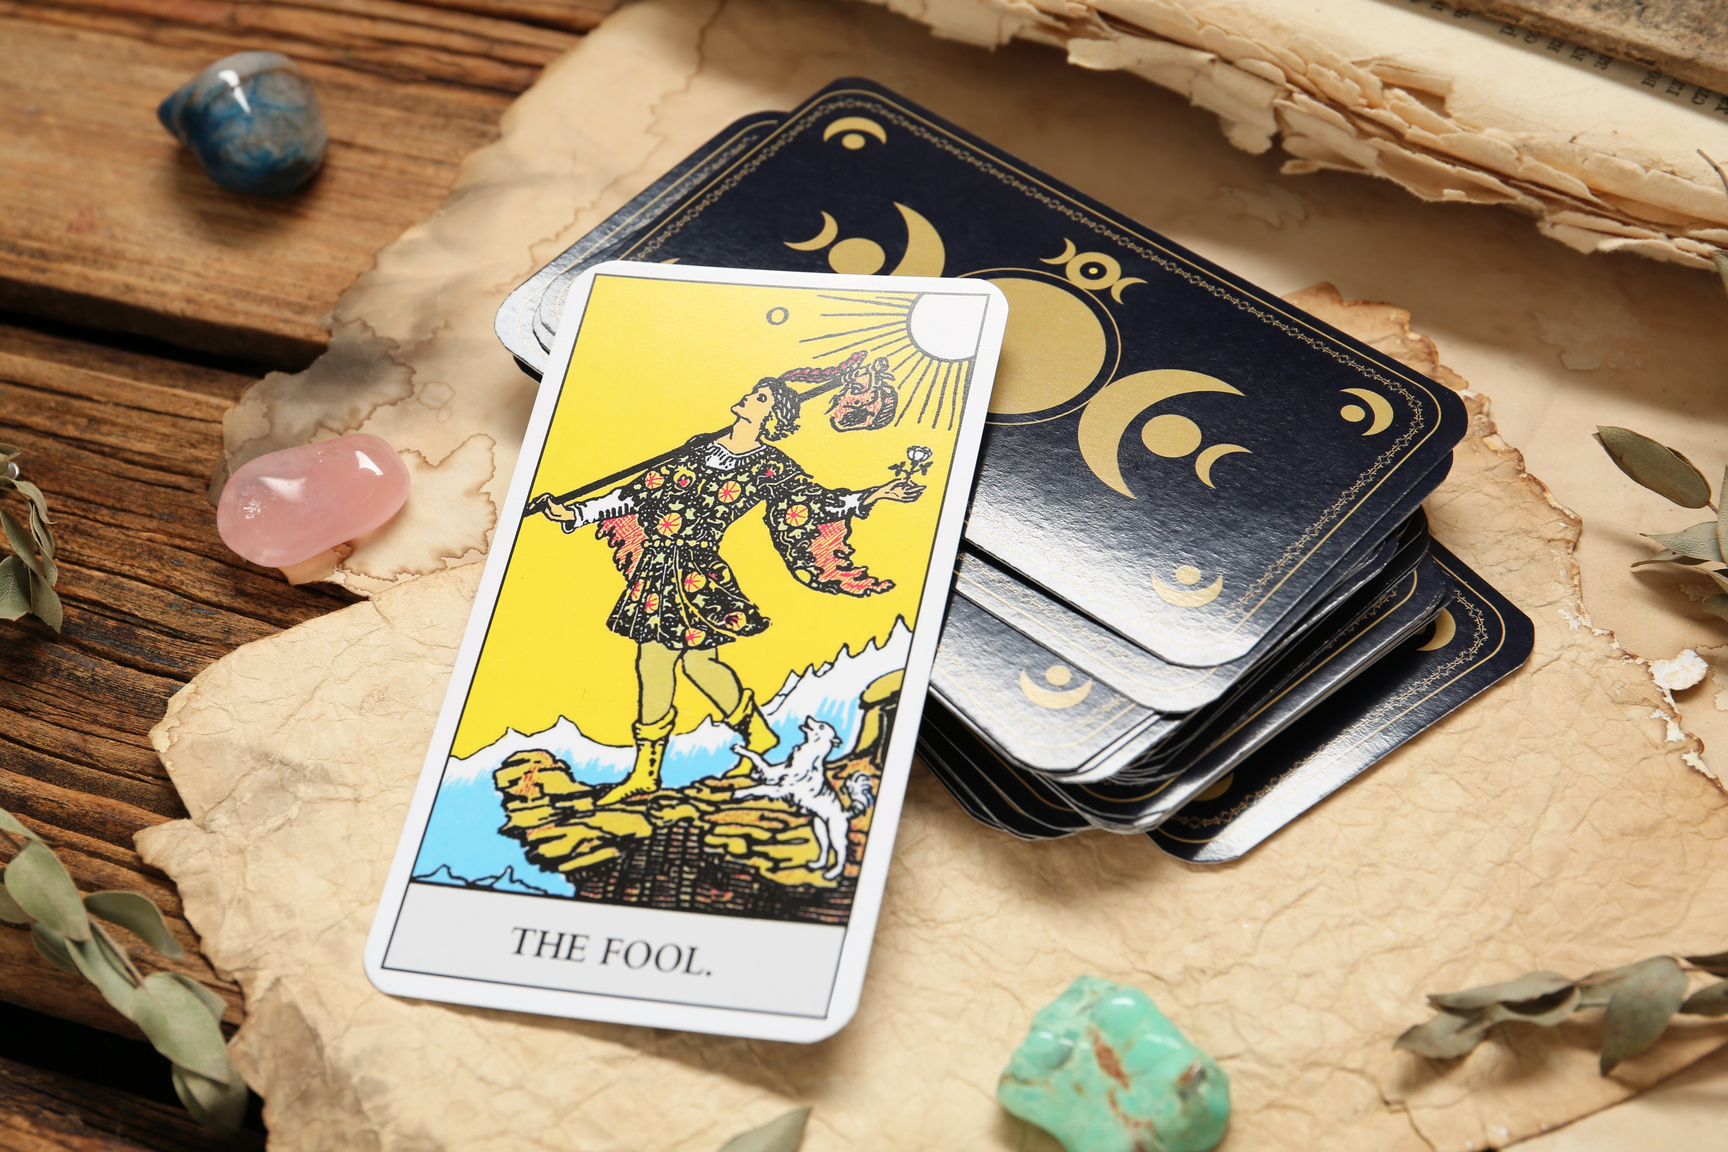 The Fool near Other Tarot Cards with Gemstones and Old Book on W